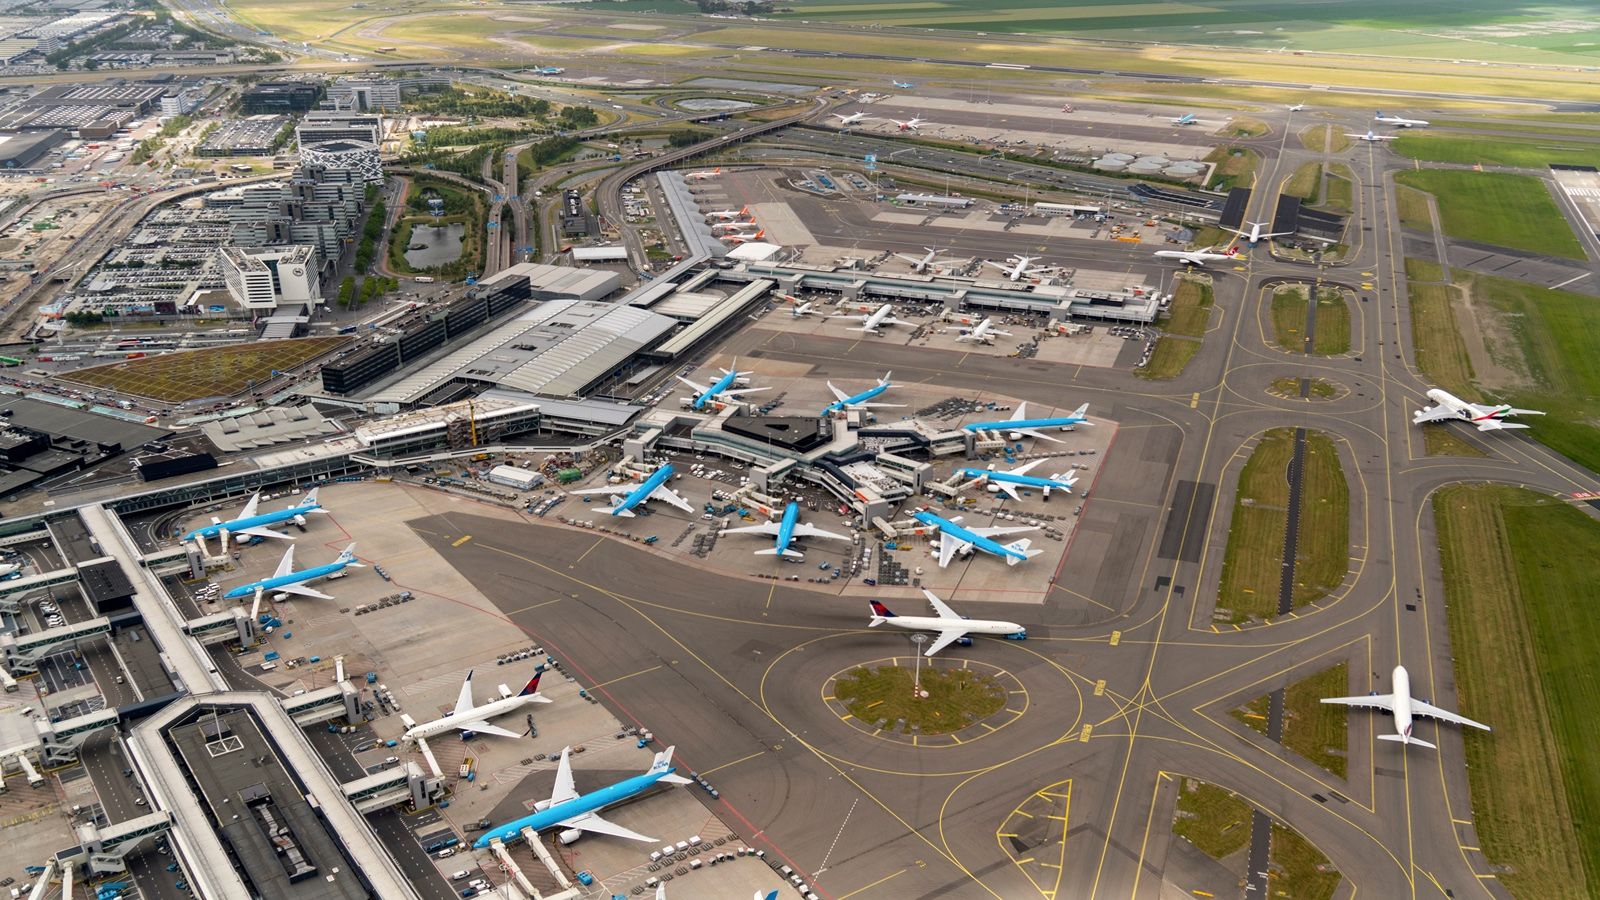 An aerial view of Amsterdam Schiphol airport with many KLM and other aircraft on the apron.